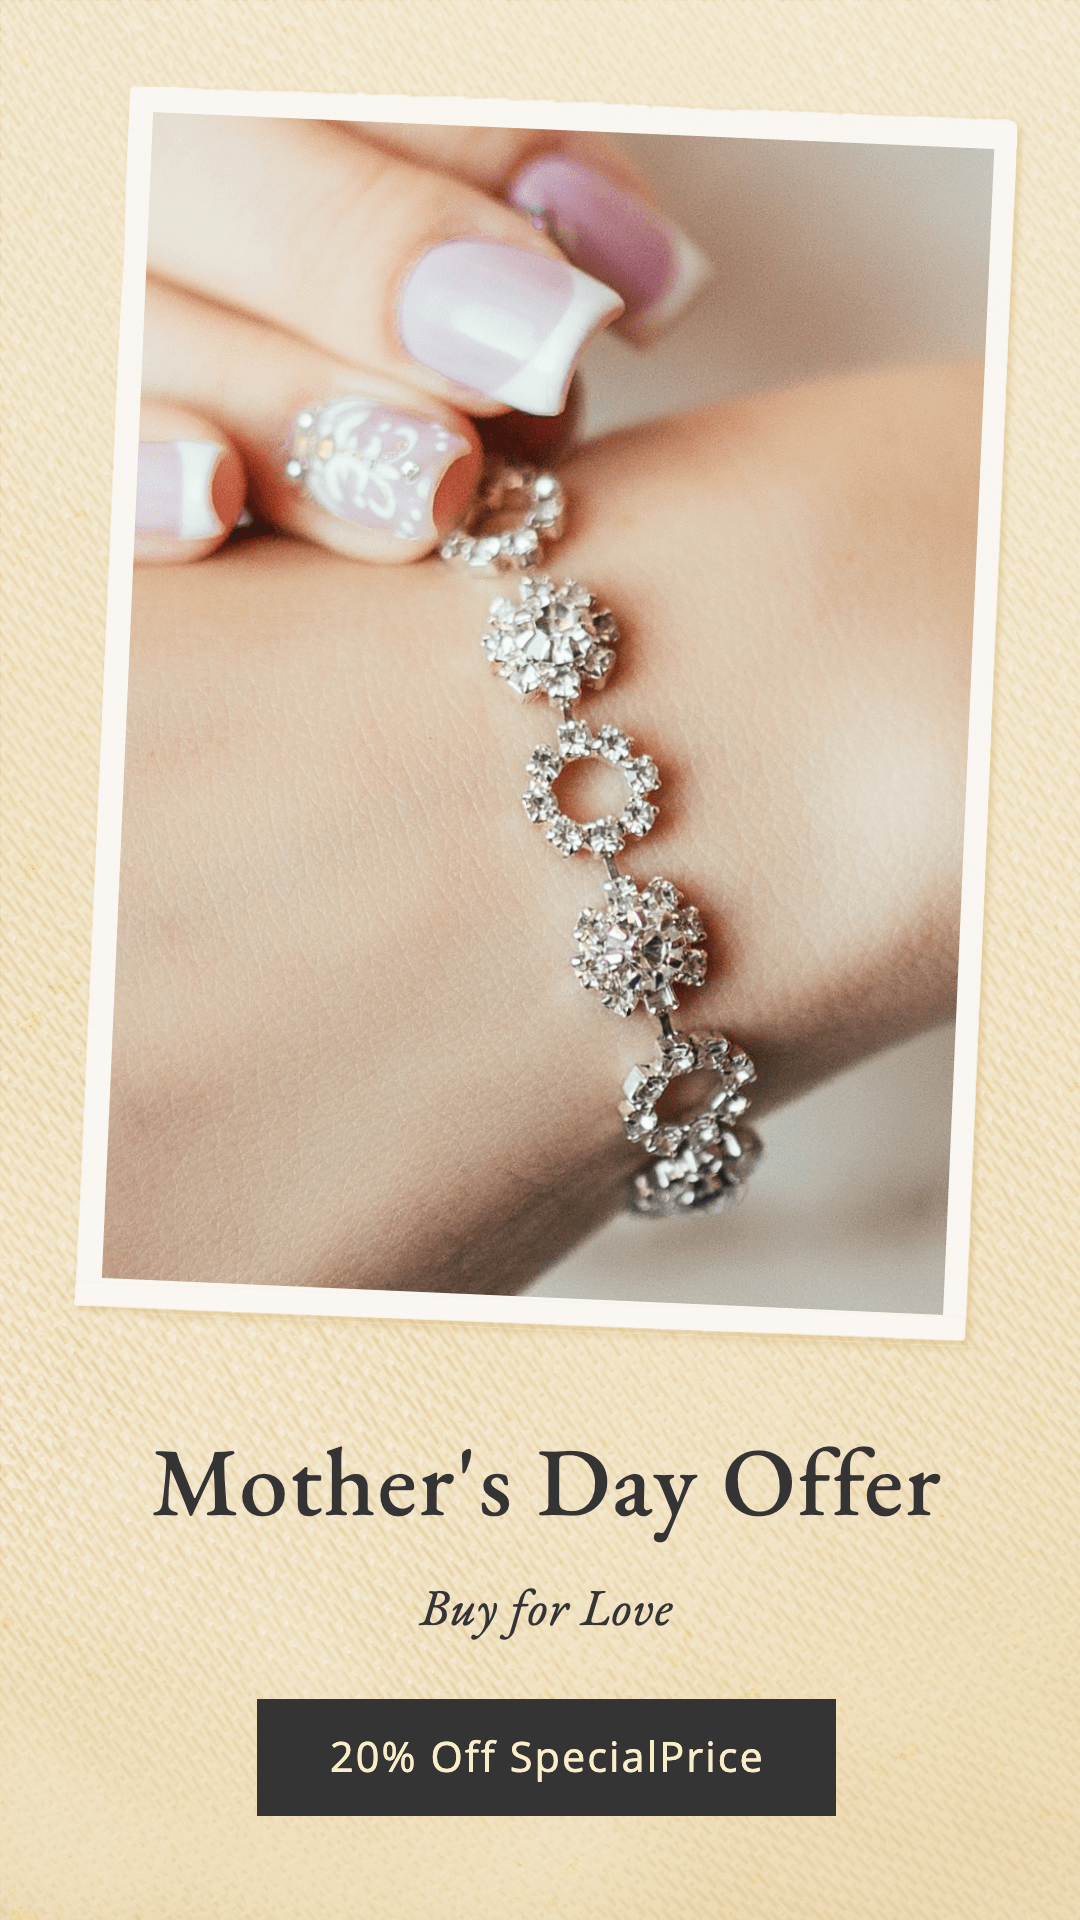 Manicure Display Mother's Day Jewelry Accessories Sale Promotion Ecommerce Story预览效果